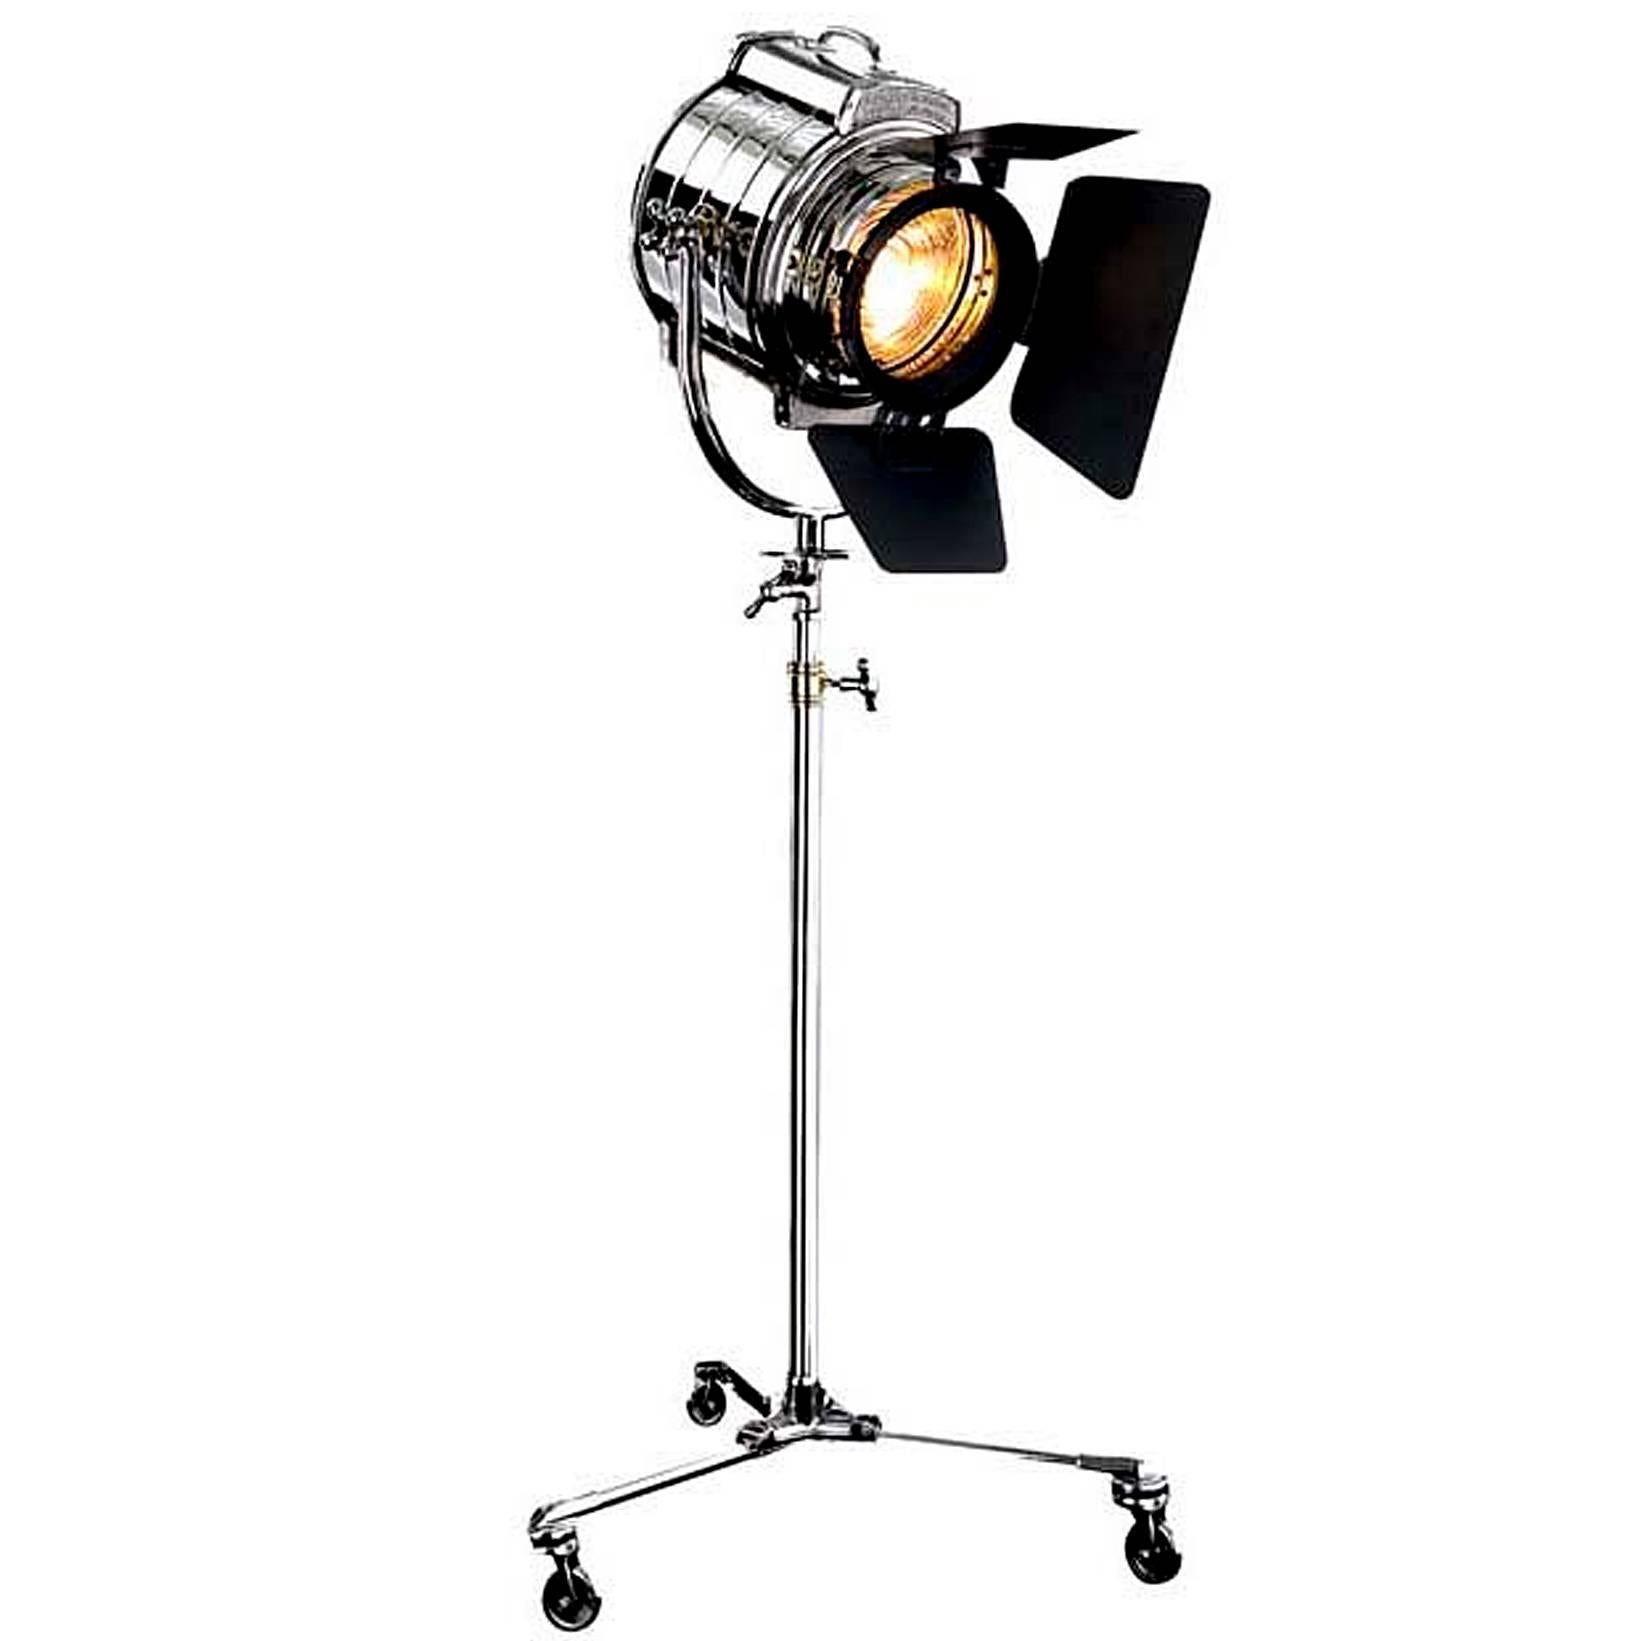 Projector Studio in Nickel on Foot with Castors Fresnel Lens and Four Panels